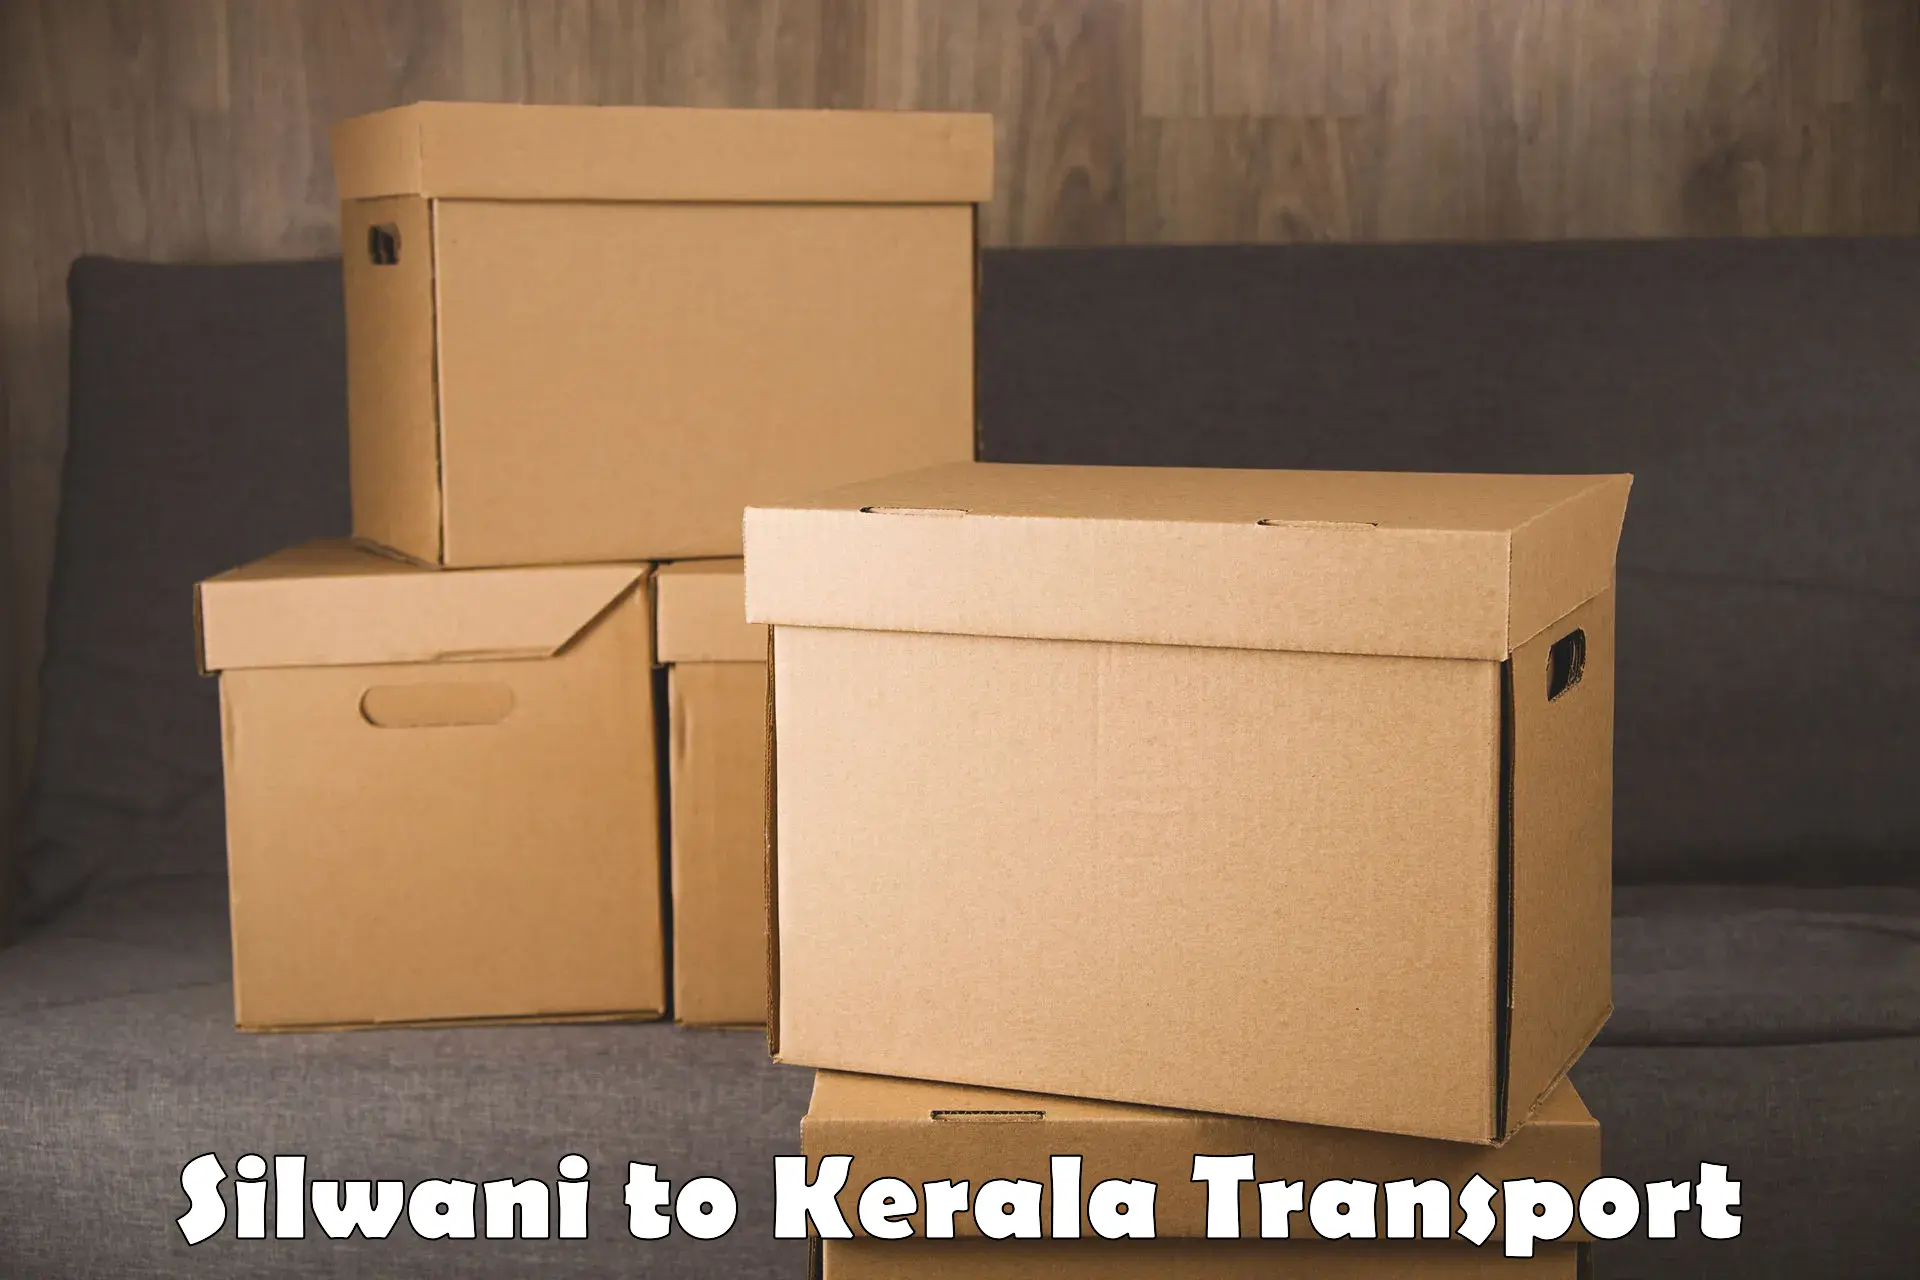 Container transportation services Silwani to Kerala